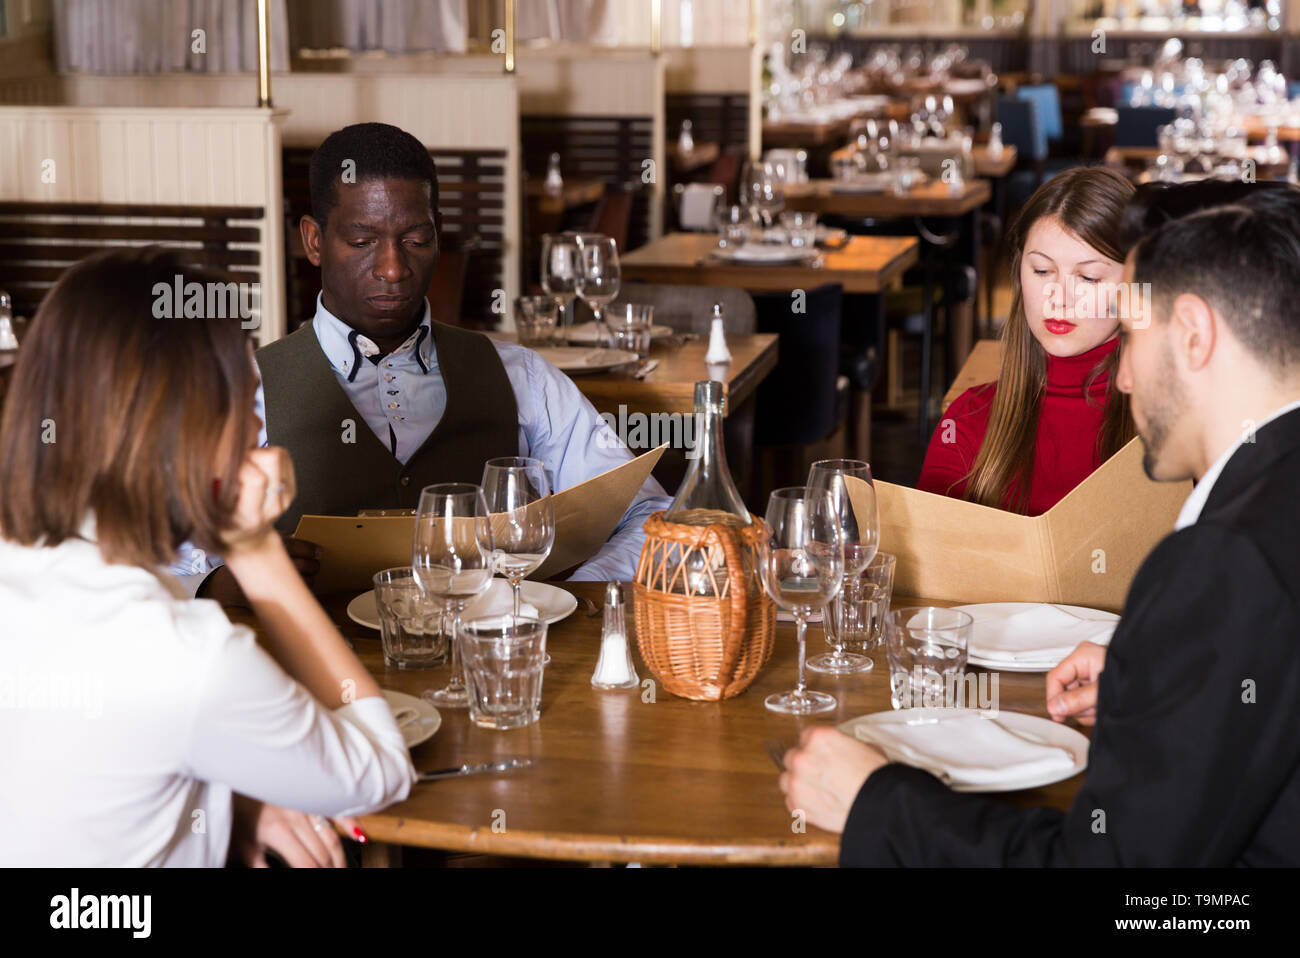 Group of young people sitting at table in cozy restaurant, choosing dishes from menu Stock Photo